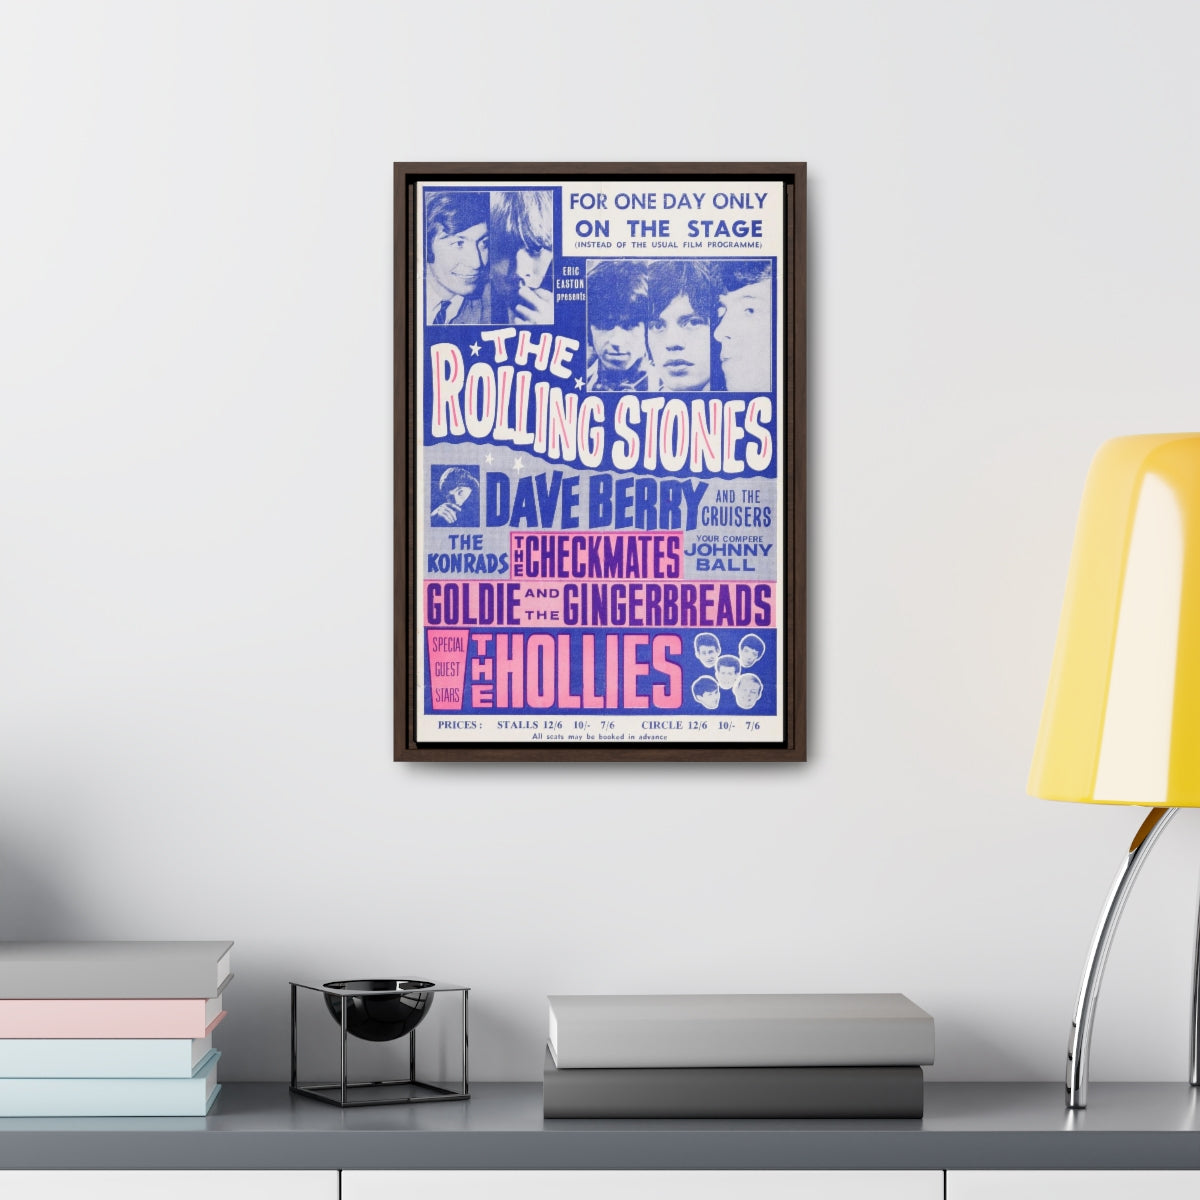 The Rolling Stones - The Hollies - Framed Canvas Concert Poster